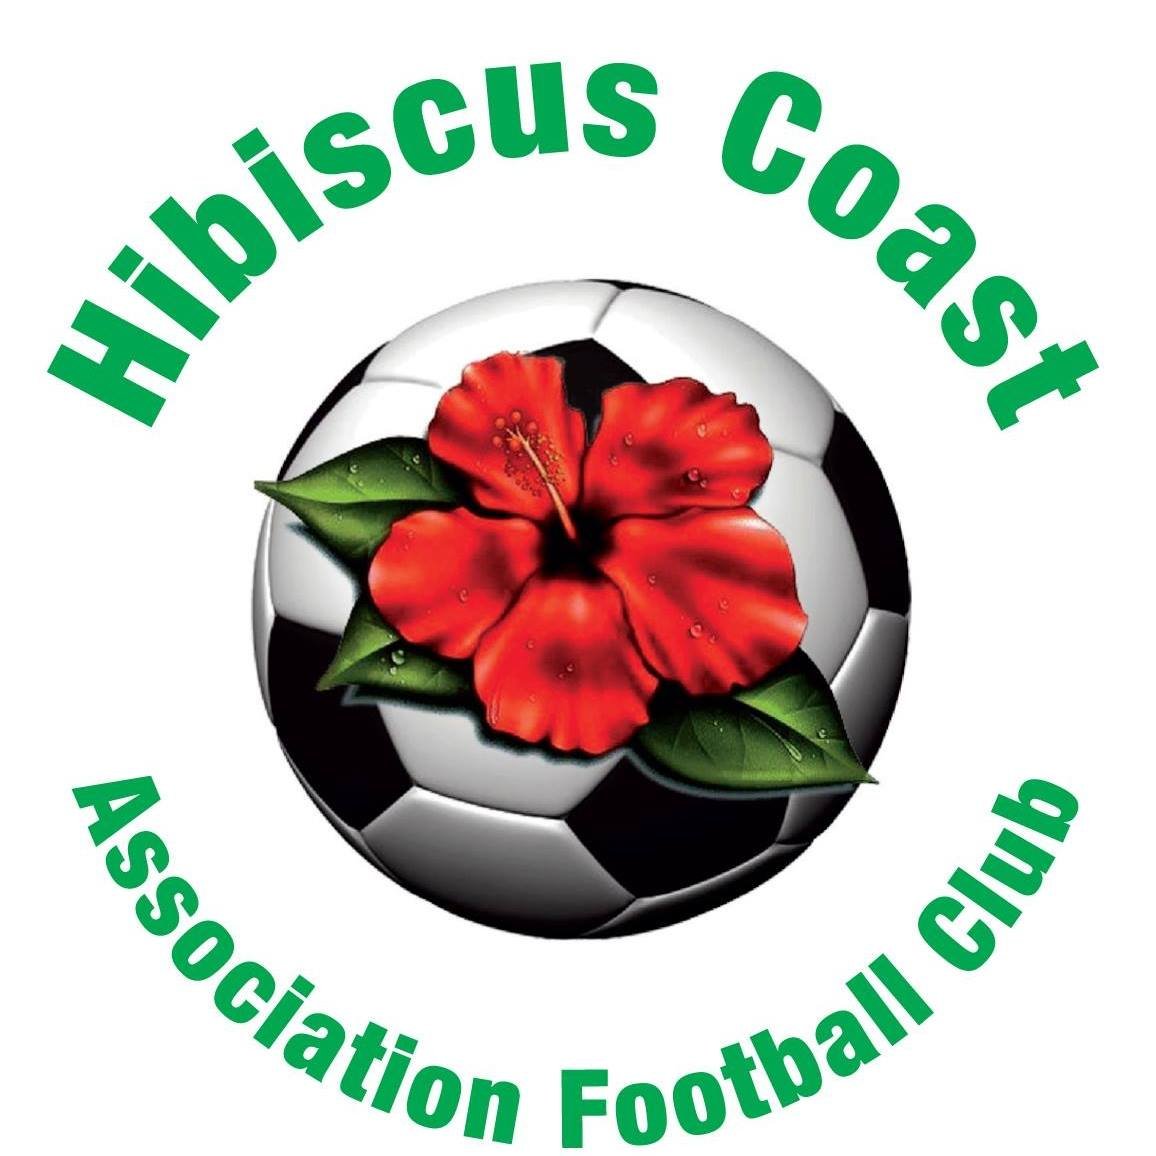 Hibiscus Coast Association Football Club | Founded 1964 | Stanmore Bay, New Zealand #COYG